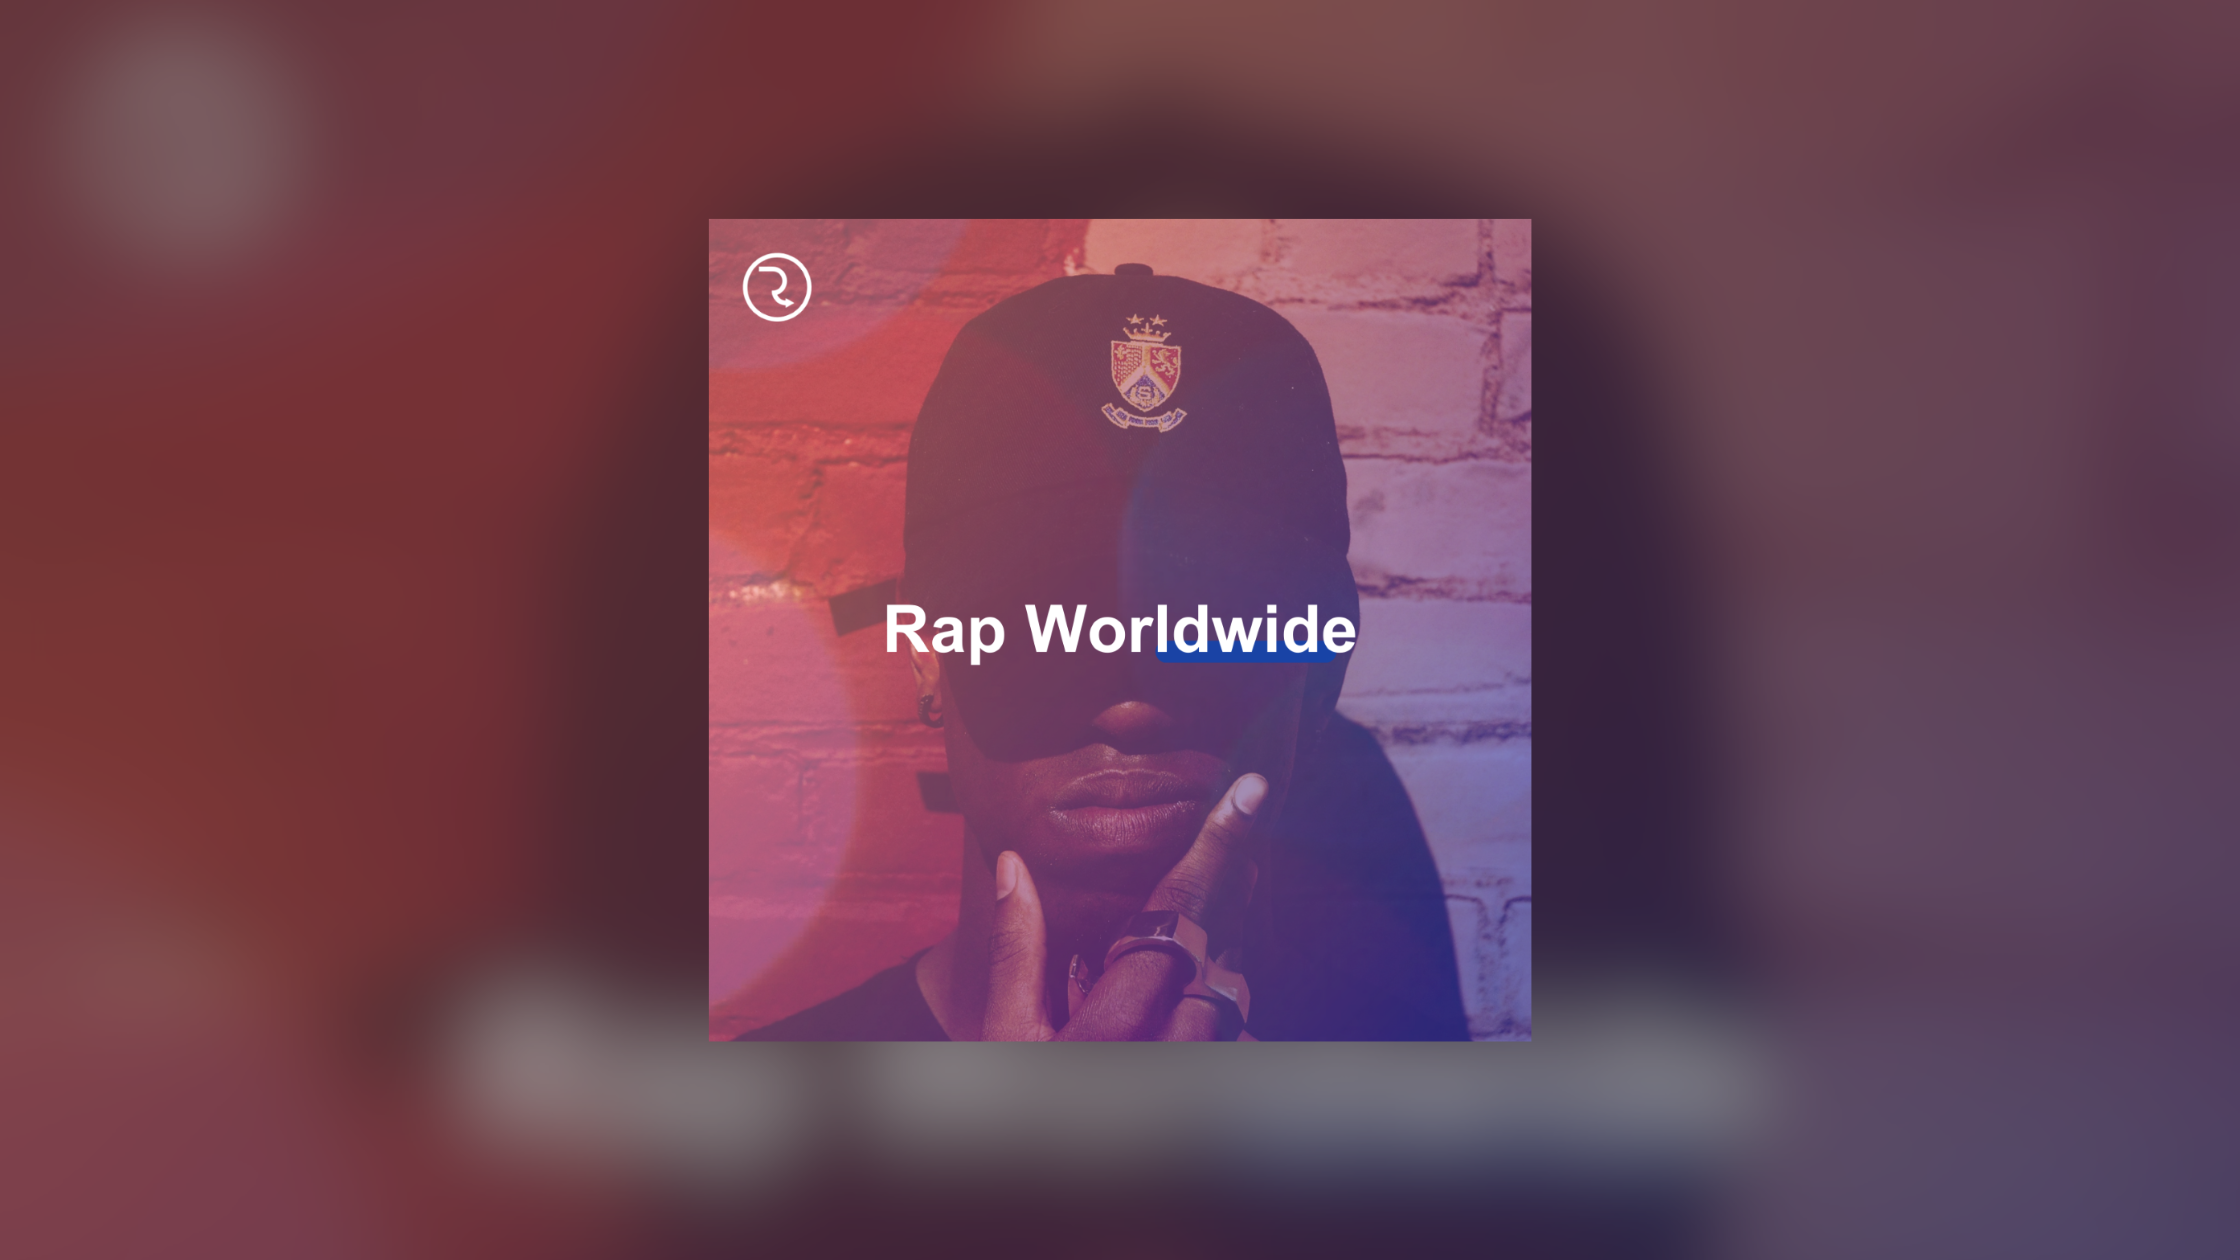 Introducing Rap Worldwide – RouteNote’s playlist with the best tracks new in hip hop and rap